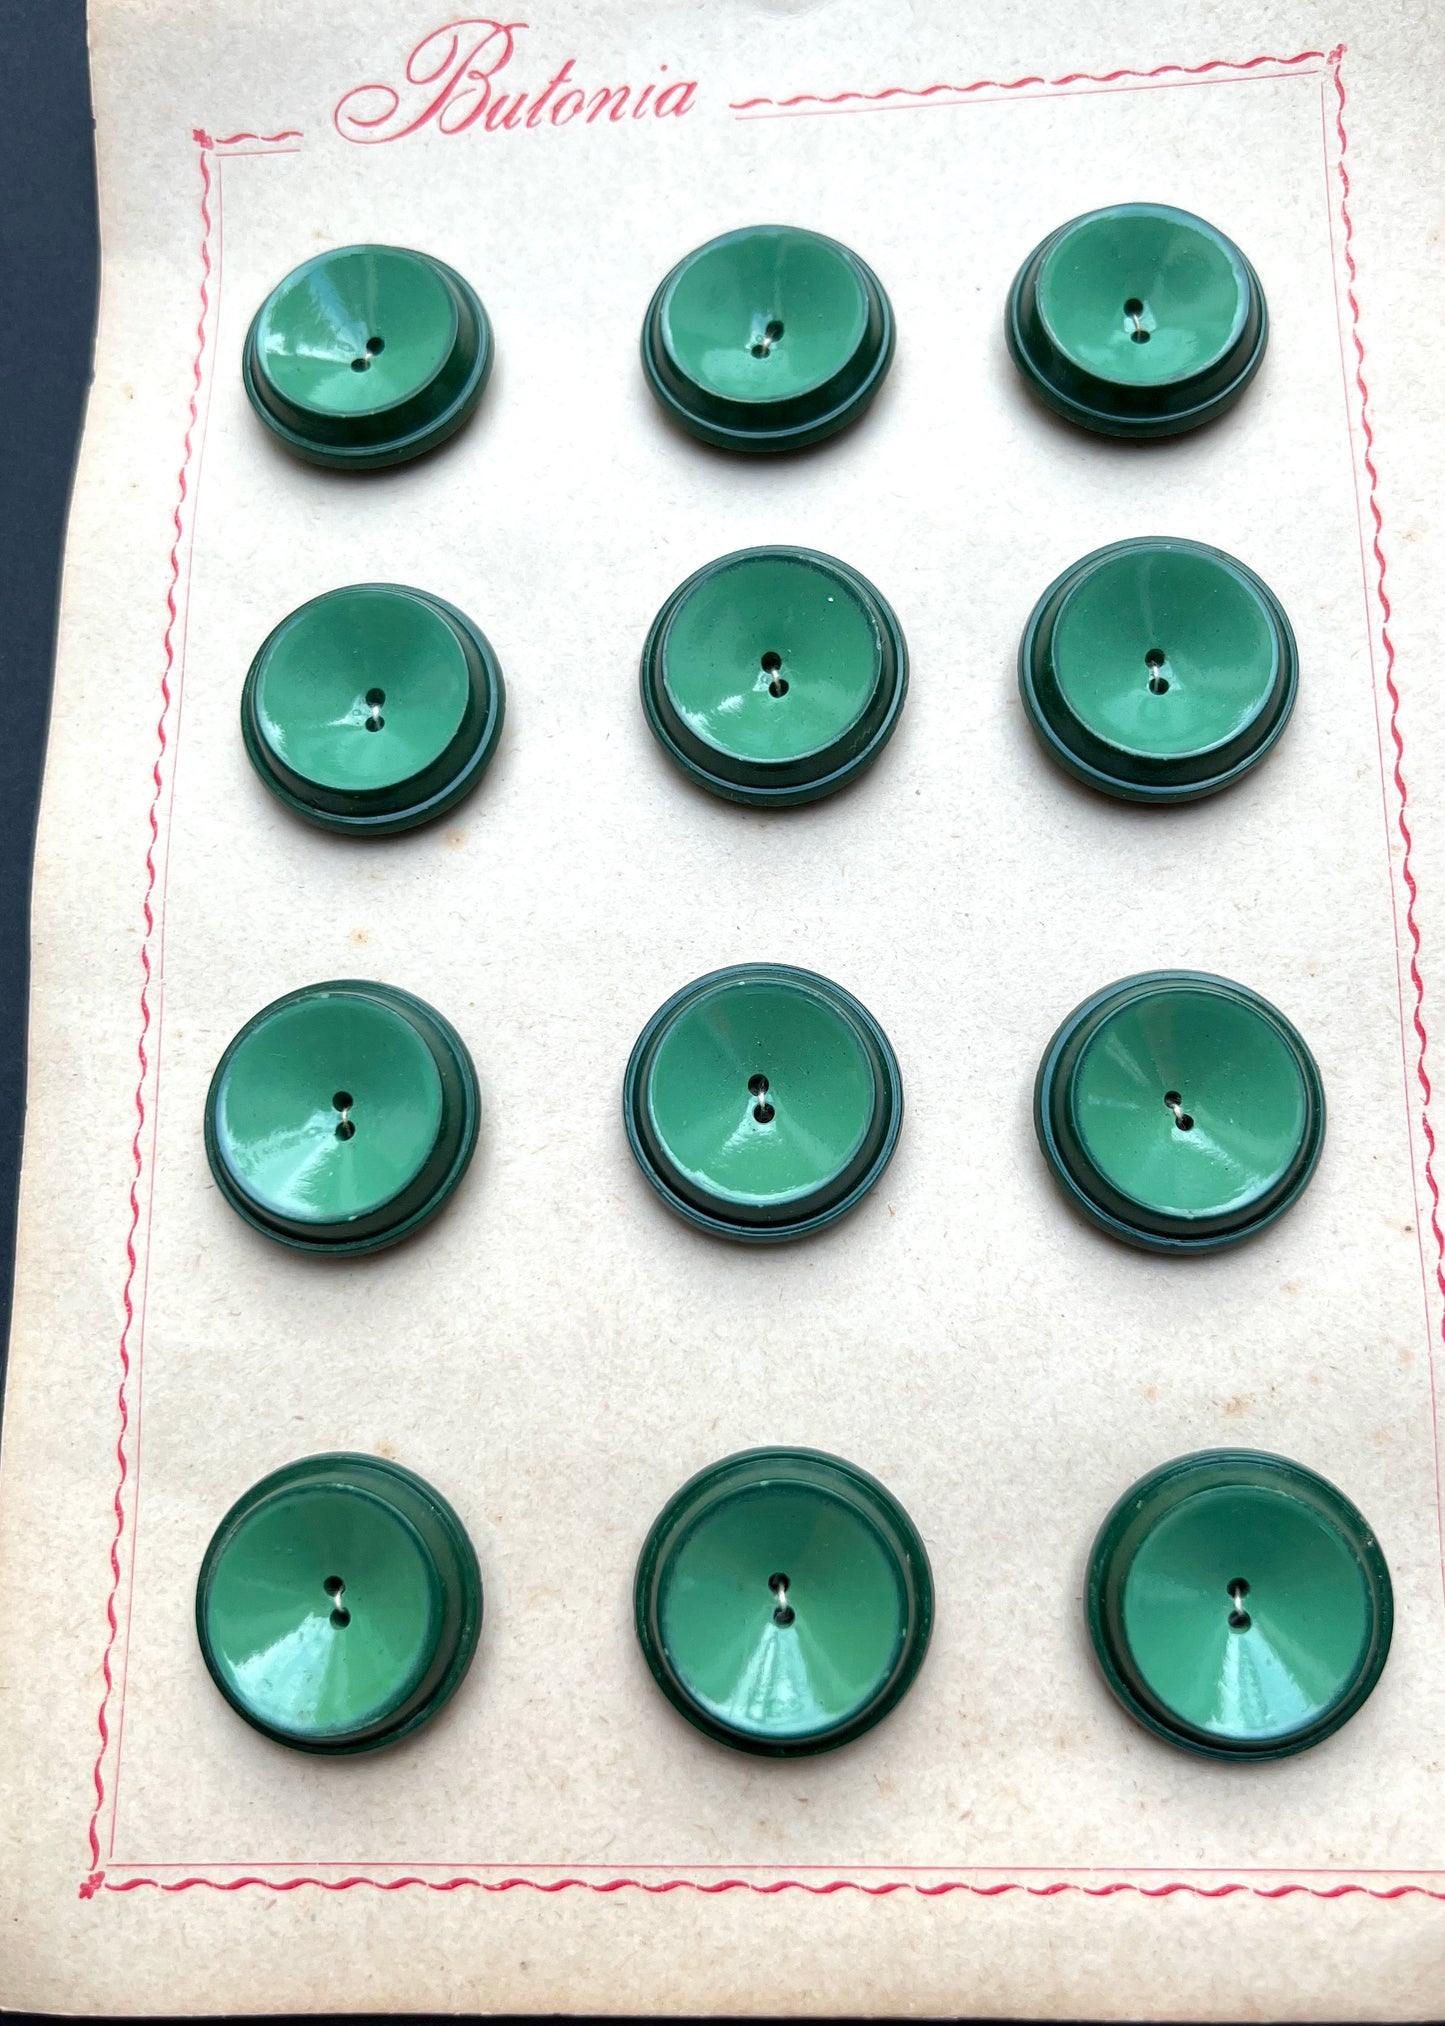 Vintage Italian Dark and Light Turquoise Green 1960s Buttons